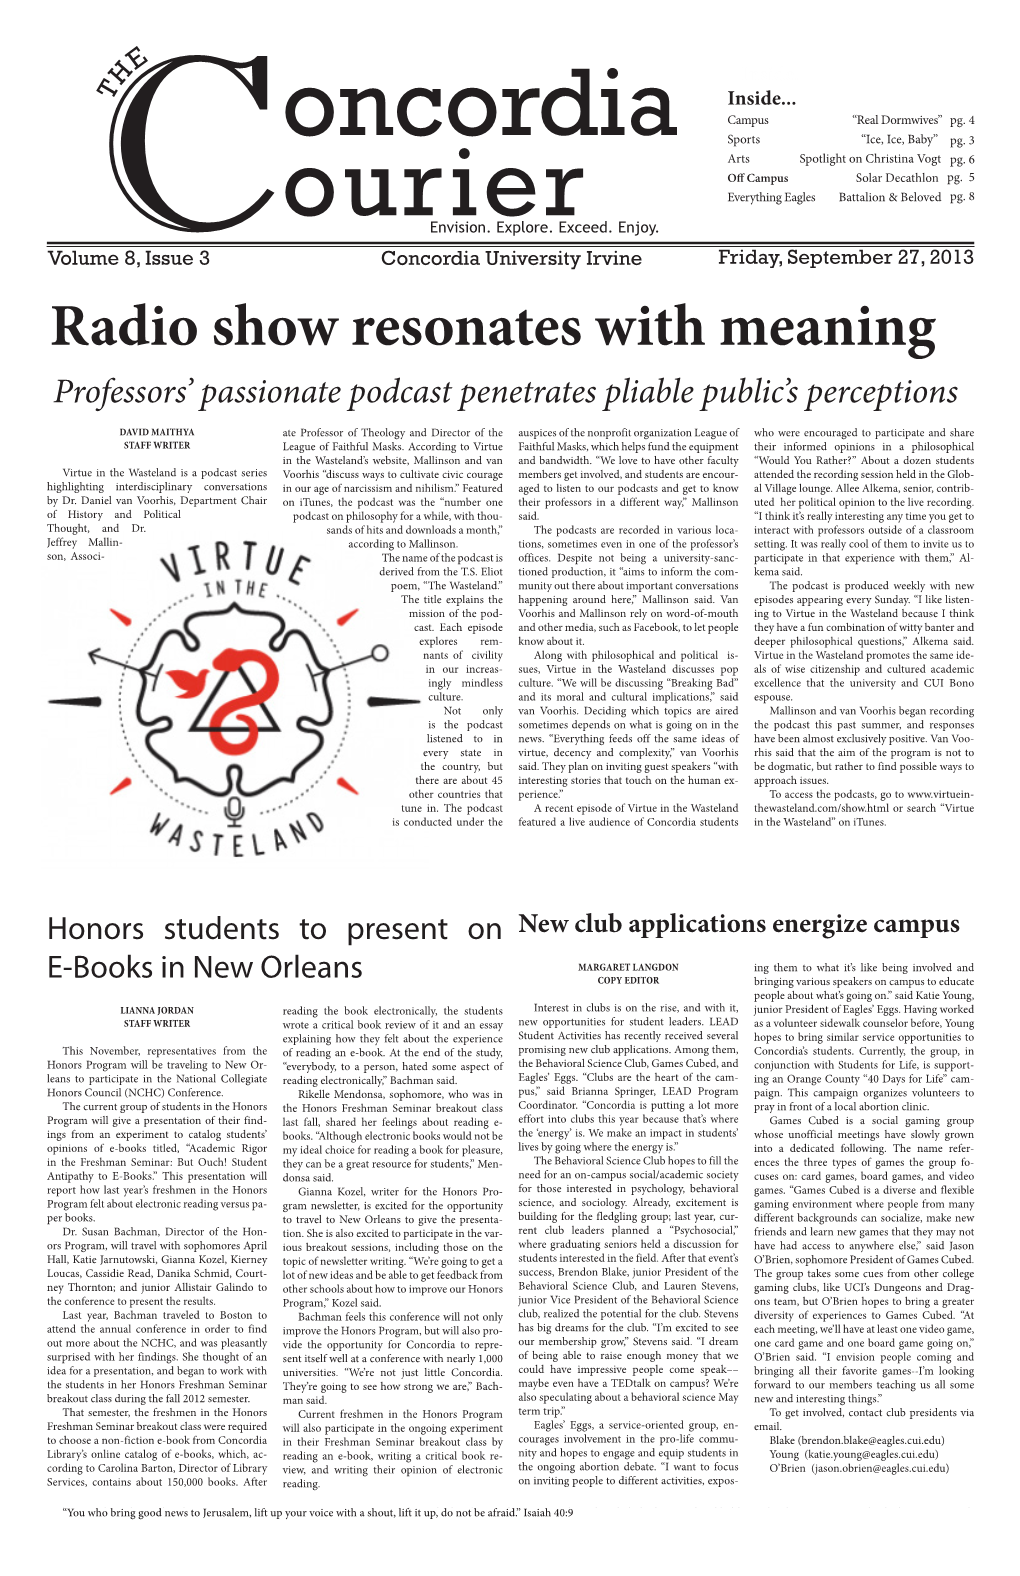 Radio Show Resonates with Meaning Professors’ Passionate Podcast Penetrates Pliable Public’S Perceptions